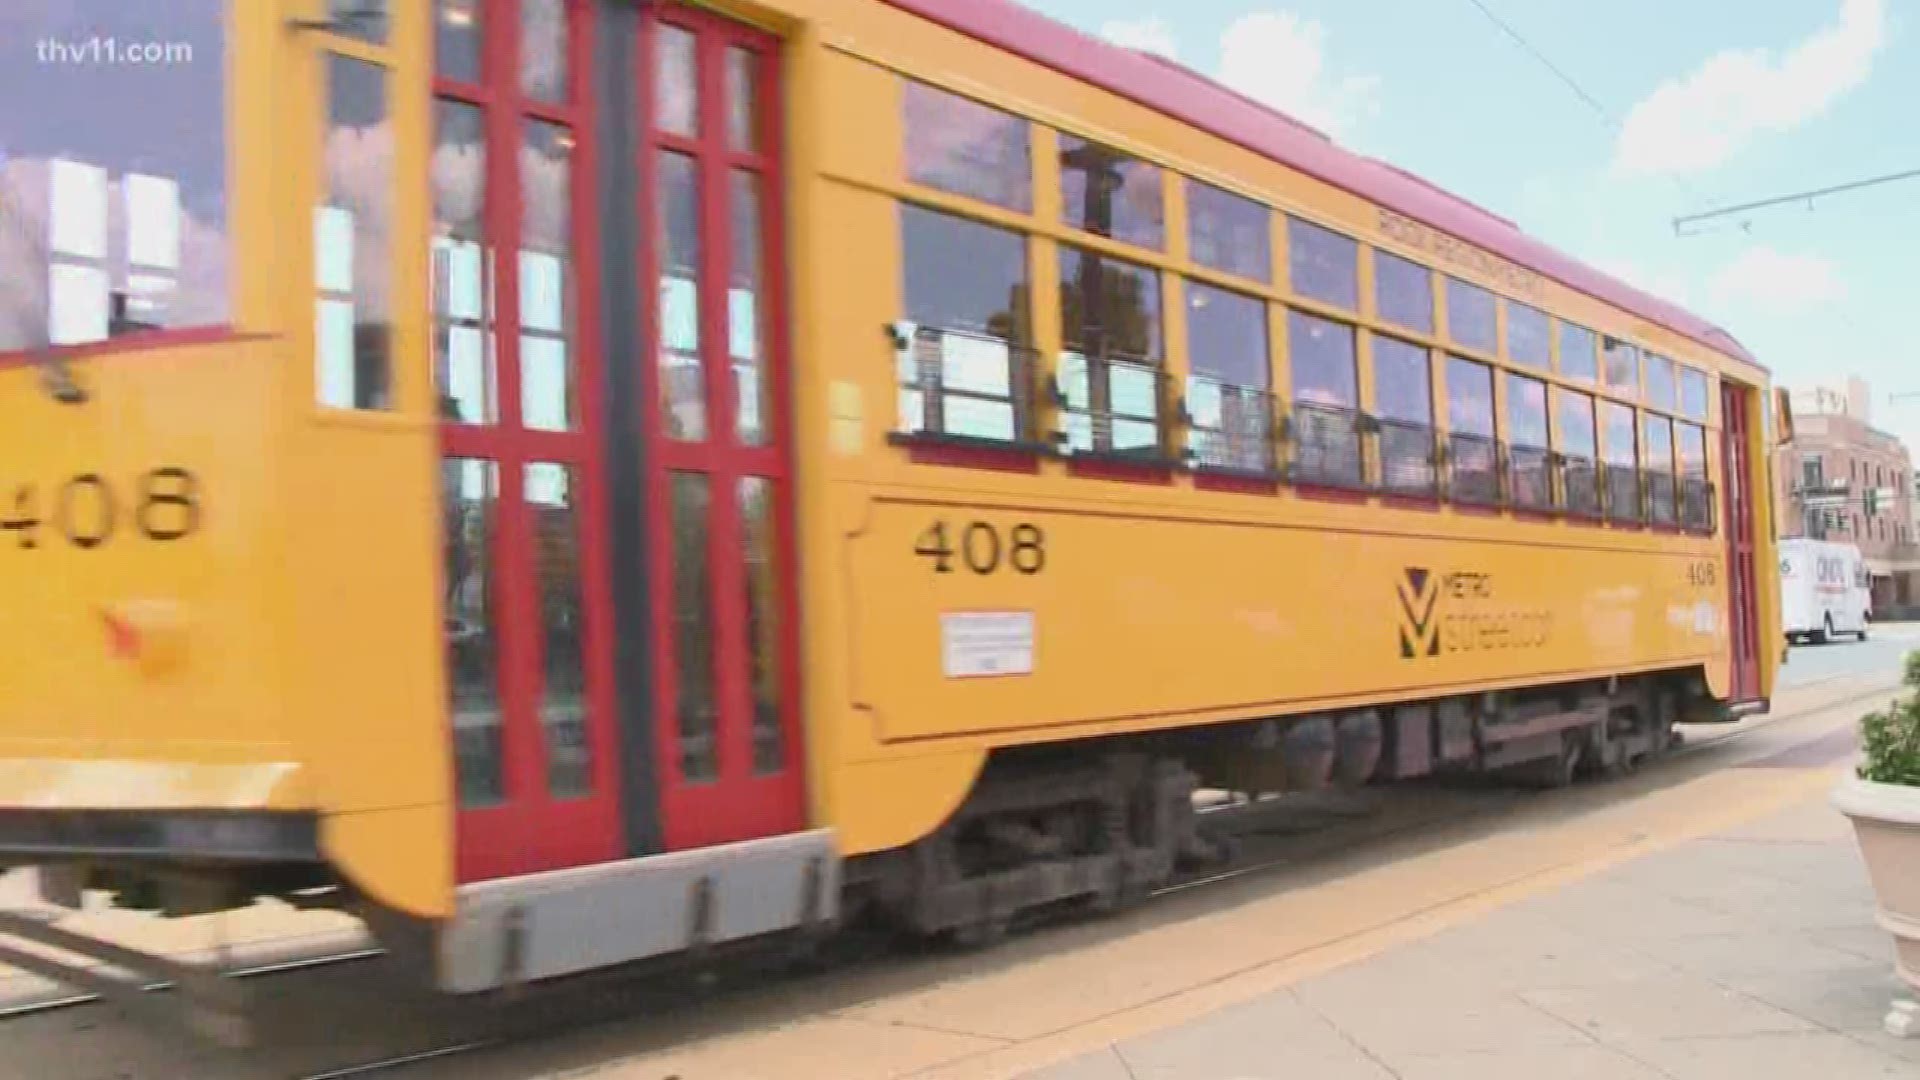 The trend holds true for North Little Rock and Little Rock's downtown trolleys. 